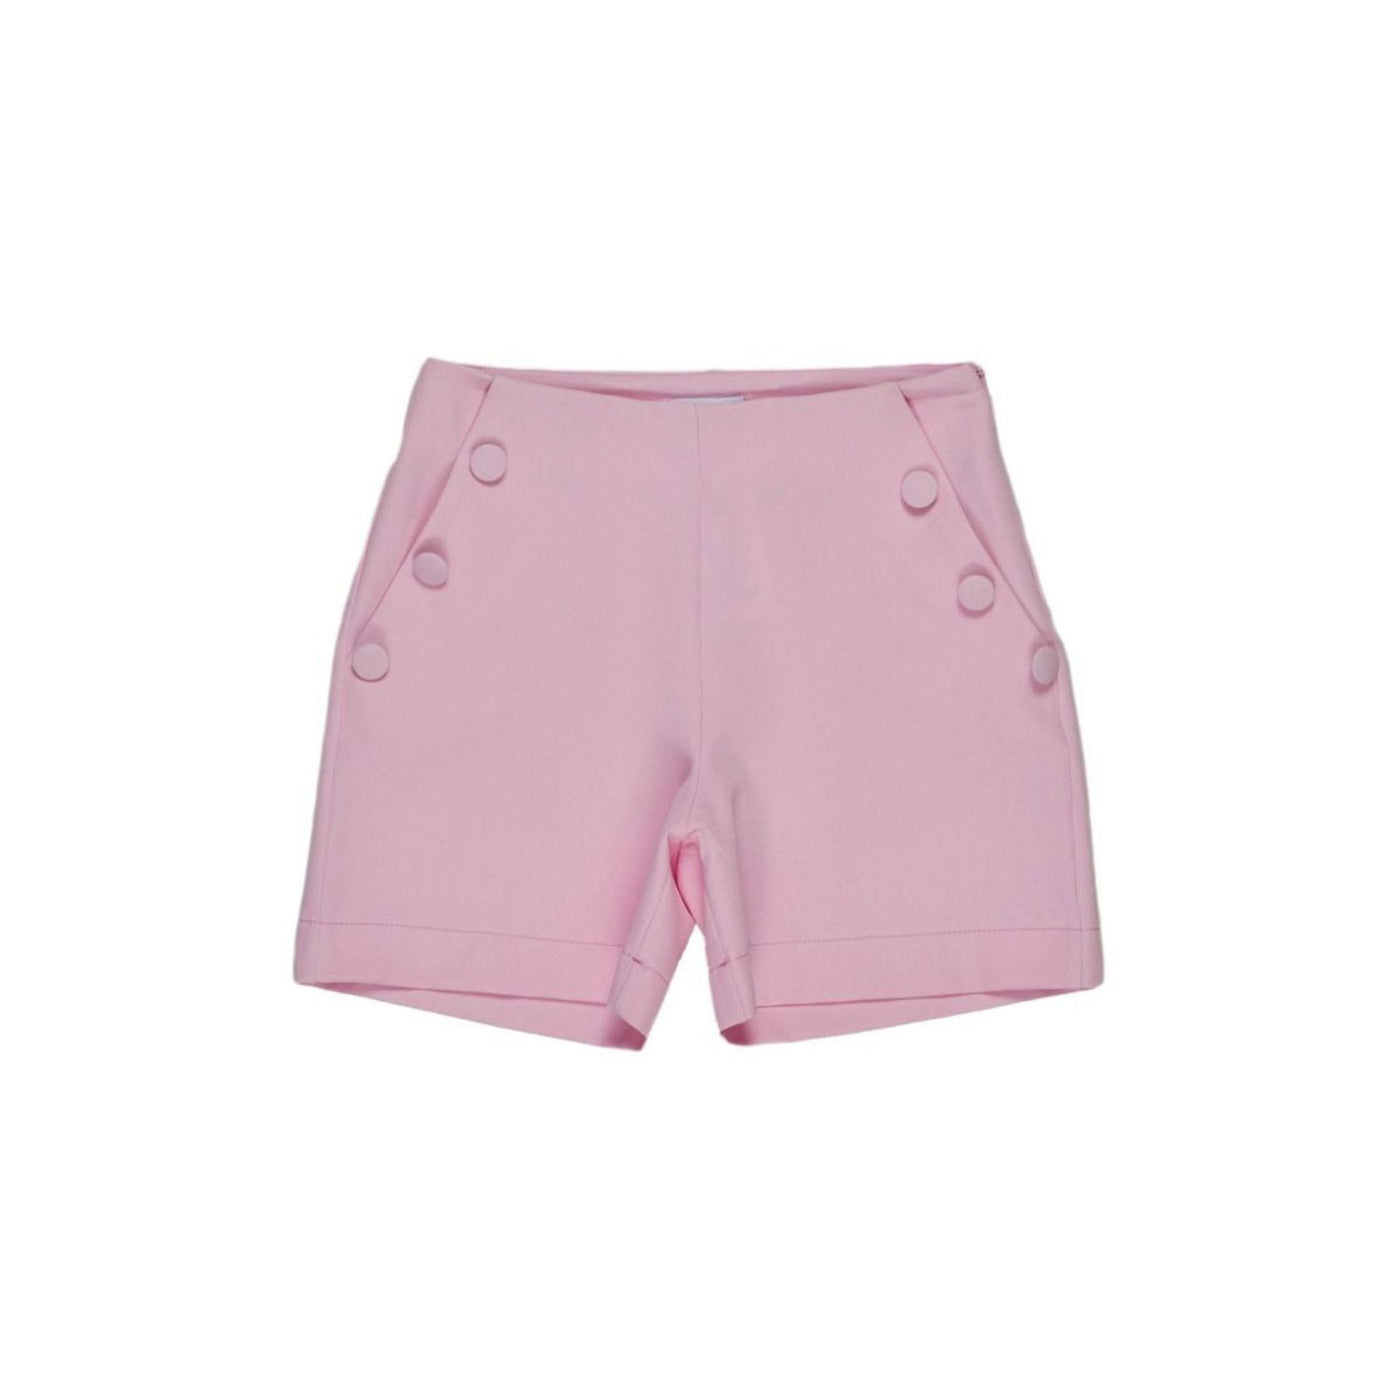 Girl's solid color stretch shorts